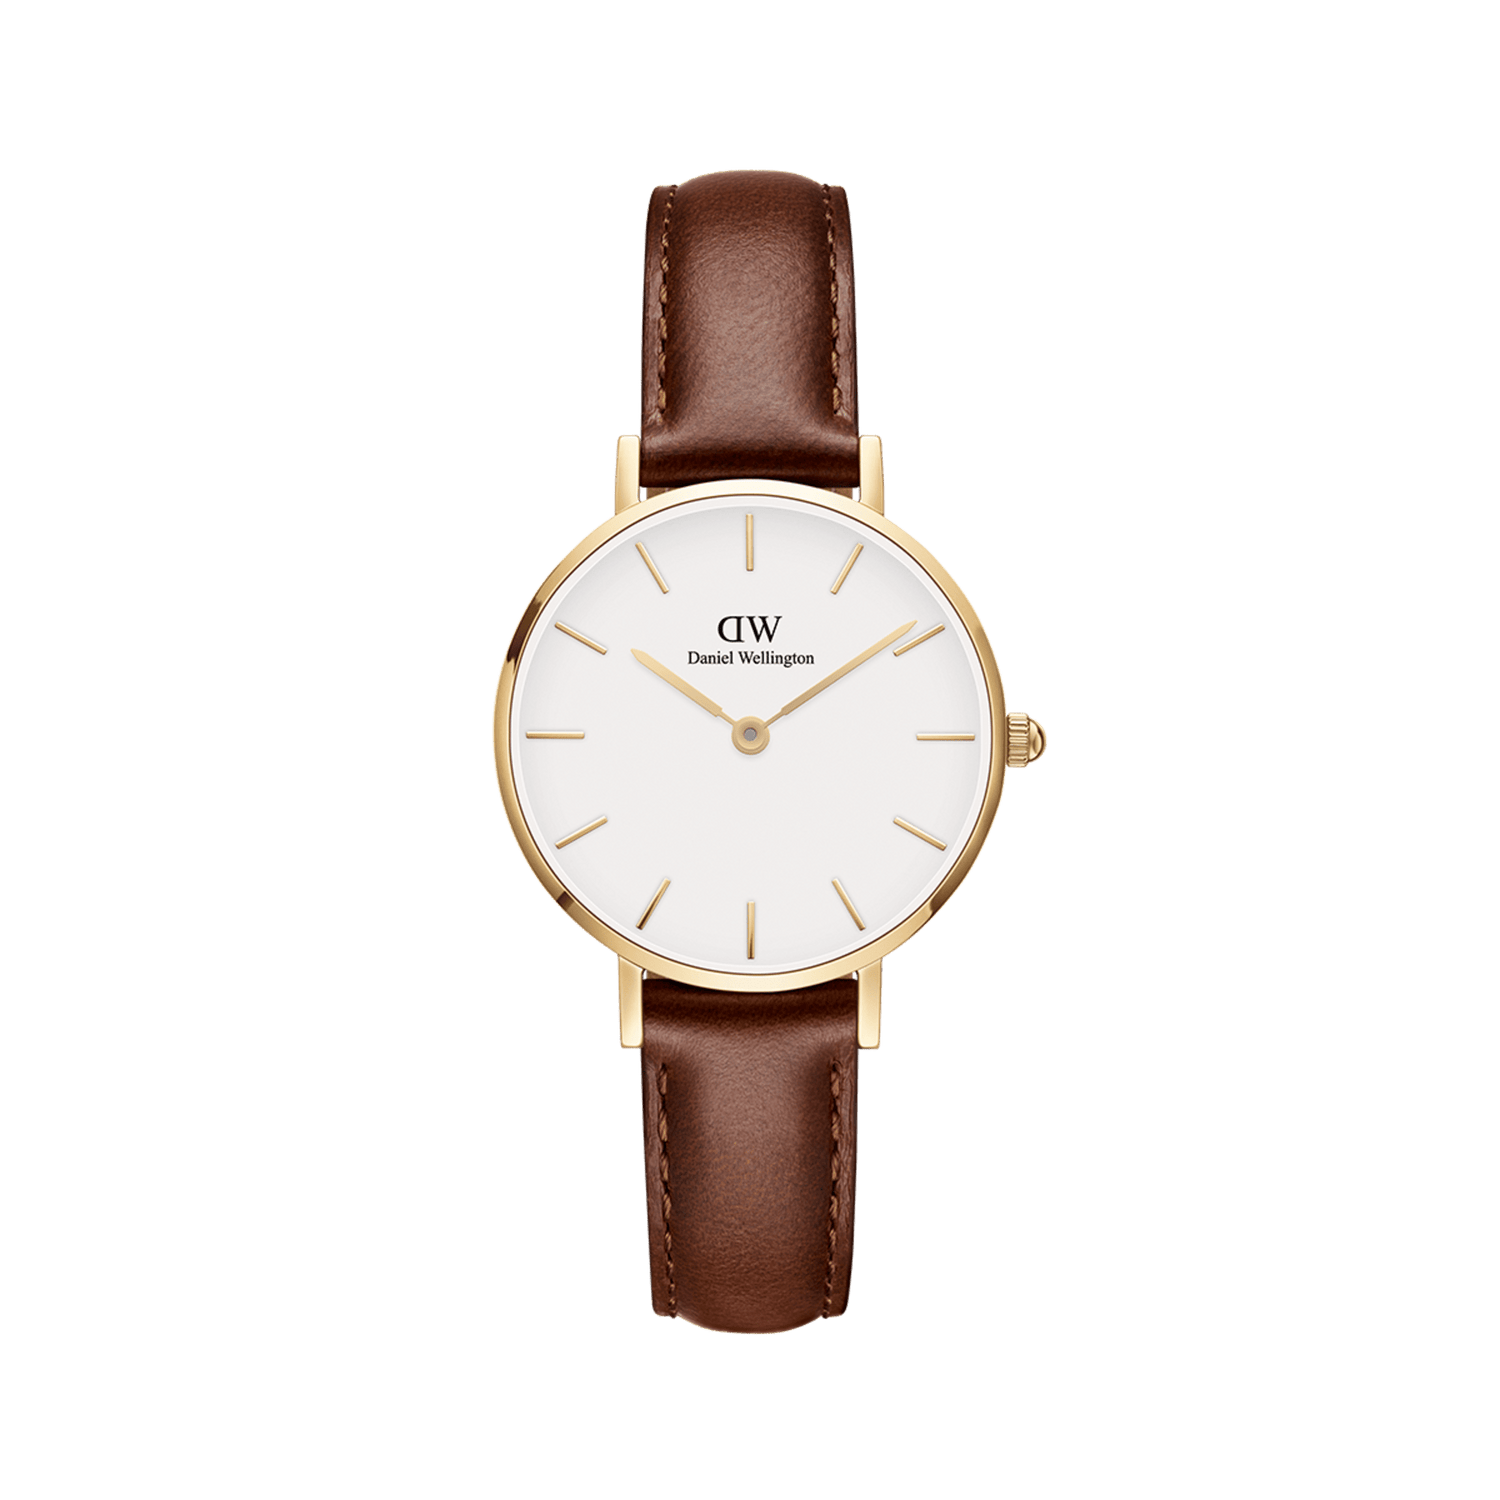 Petite Evergold – Gold & White in 36 mm | DW